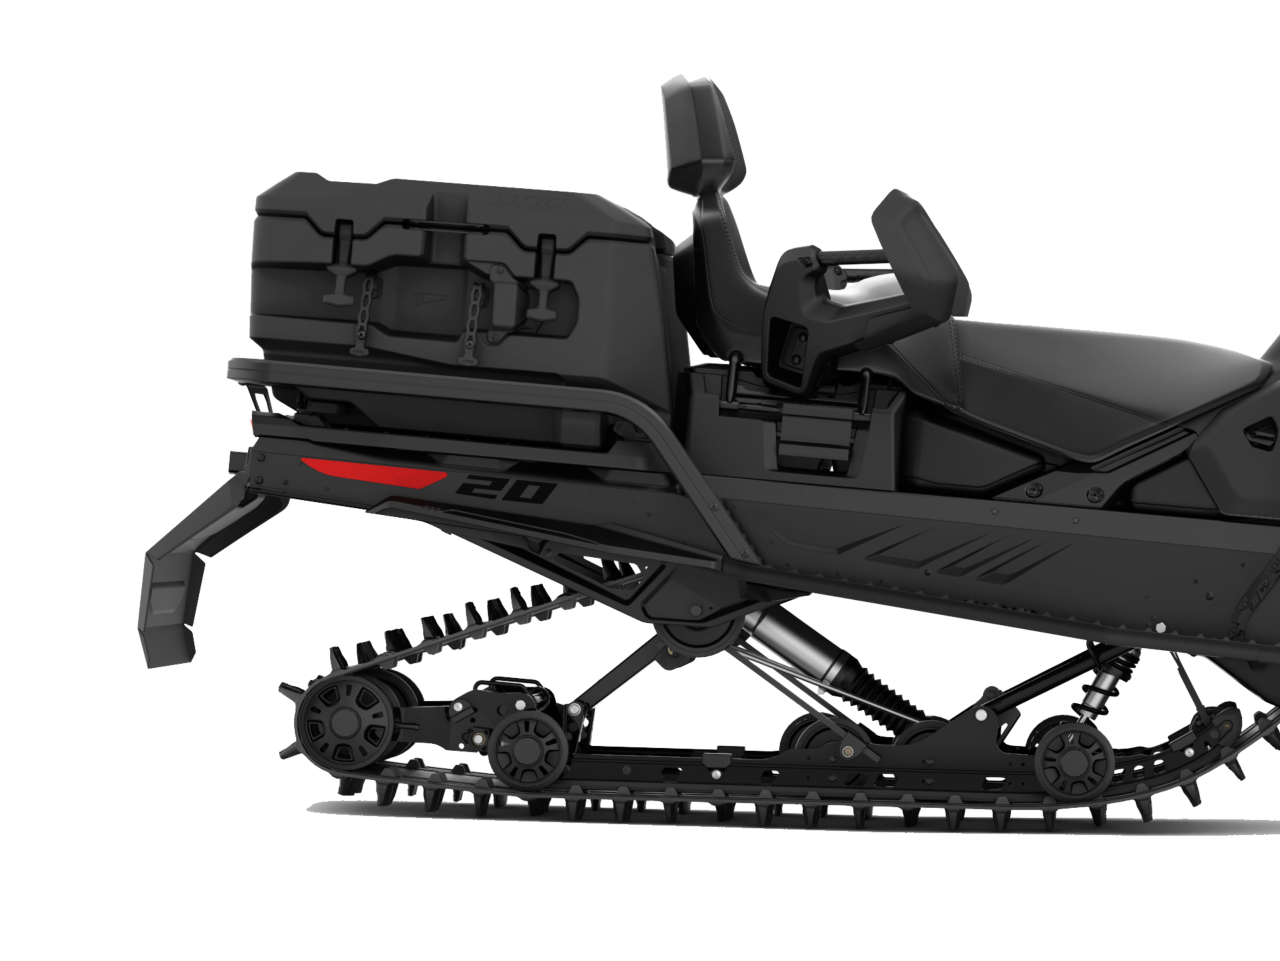 https://www.ski-doo.com/content/skidoo/no_no/modeller/crossover/expedition/_jcr_content/root/carousel_1823801055/item_1606233473048.coreimg.png/1644946022477/ski-my23-exp-se-900-ace-turbo-180-black-sk000aypf00-feature-rearsuspension.png